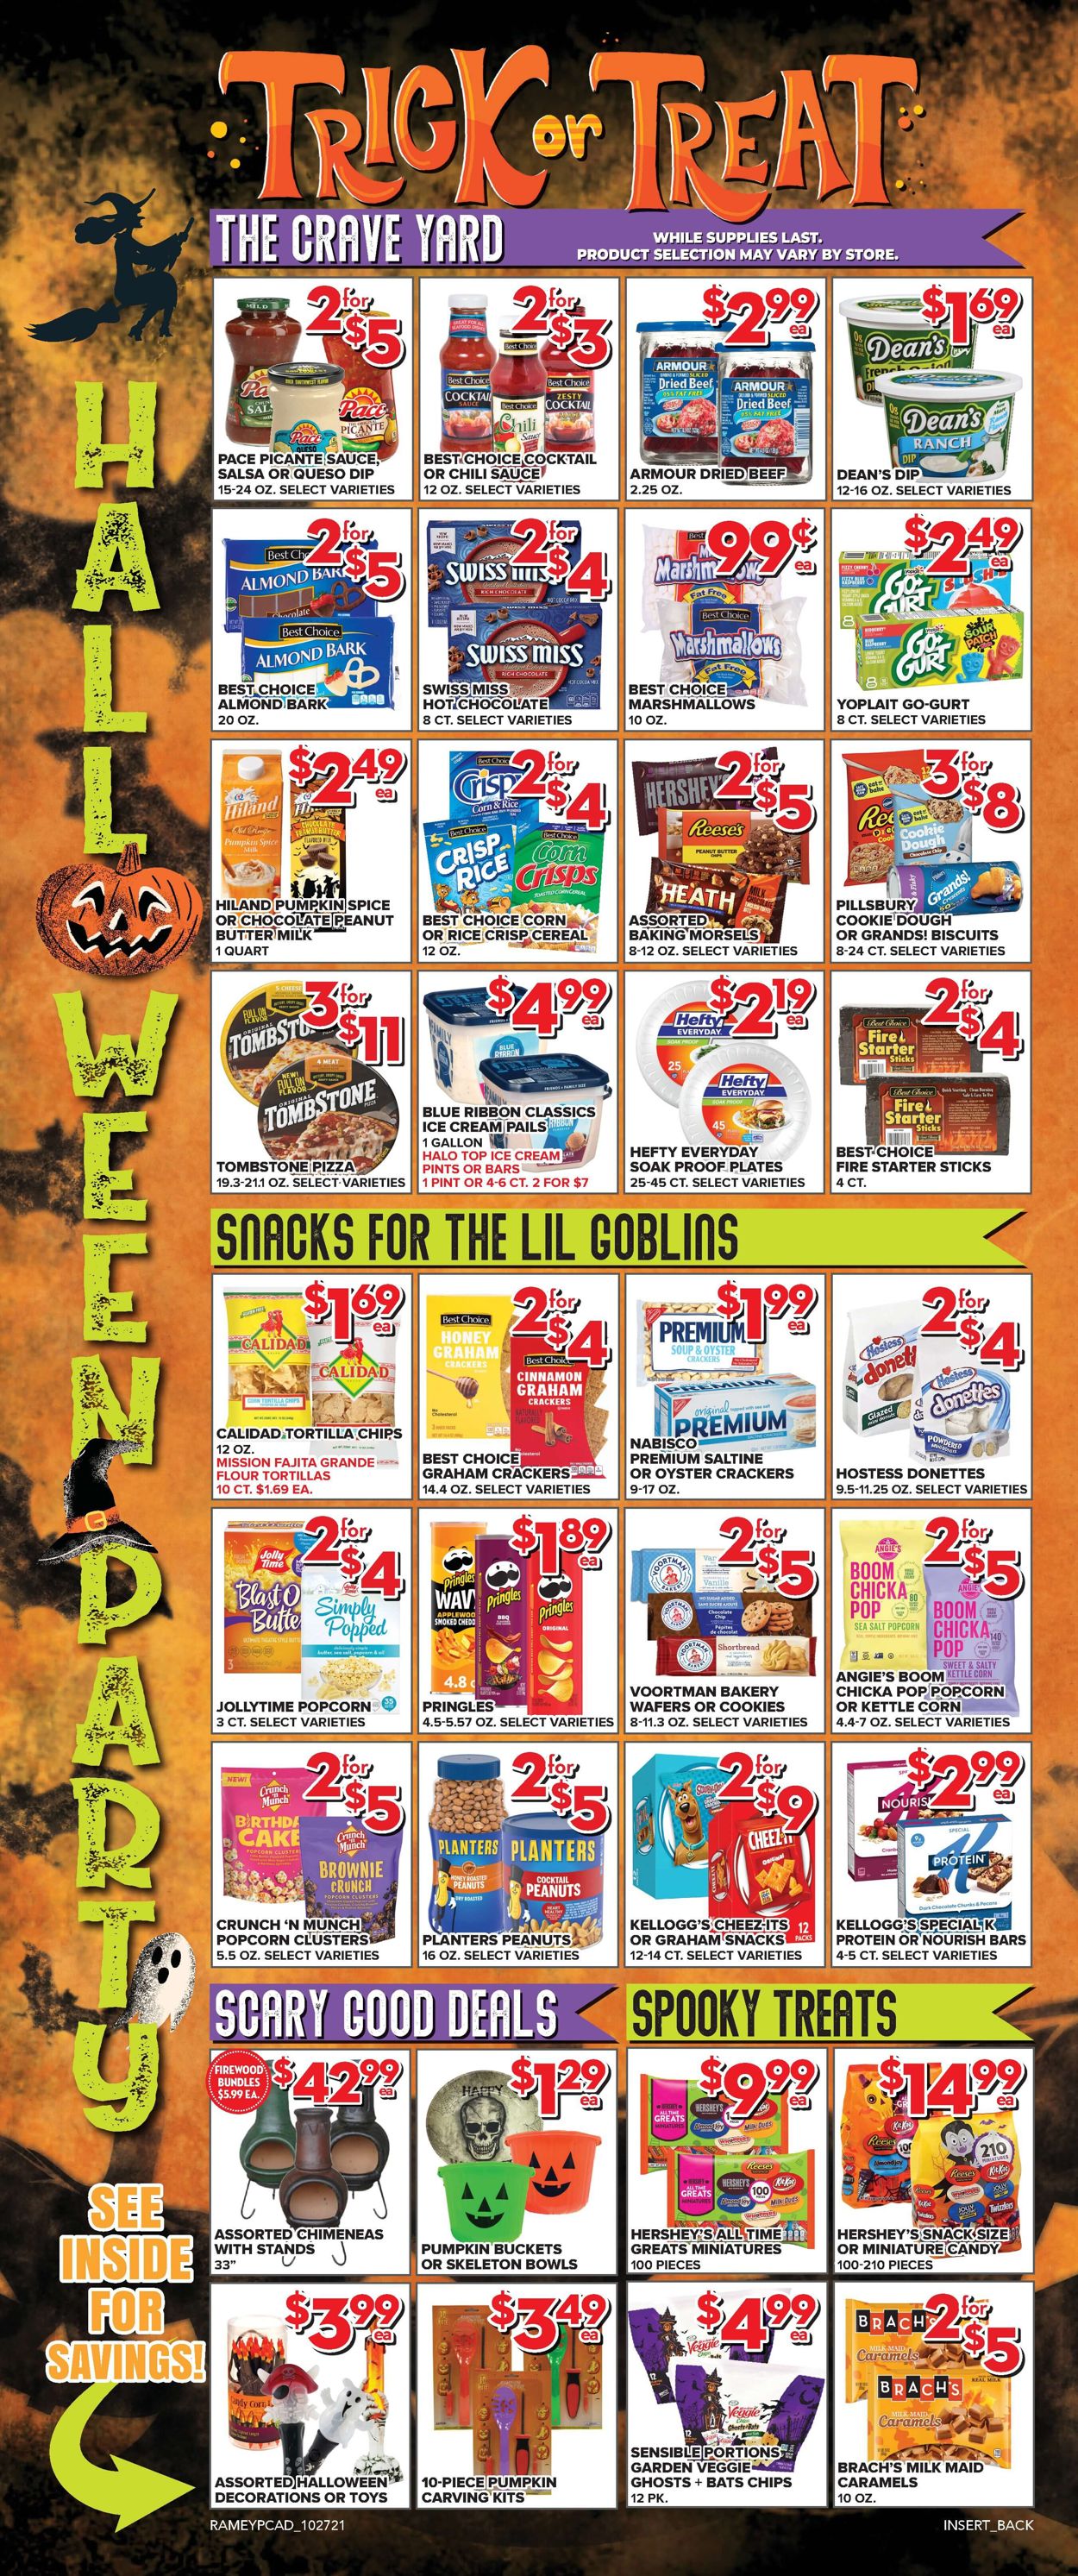 Price Cutter HALLOWEEN 2021 Weekly Ad Circular - valid 10/27-11/02/2021 (Page 6)